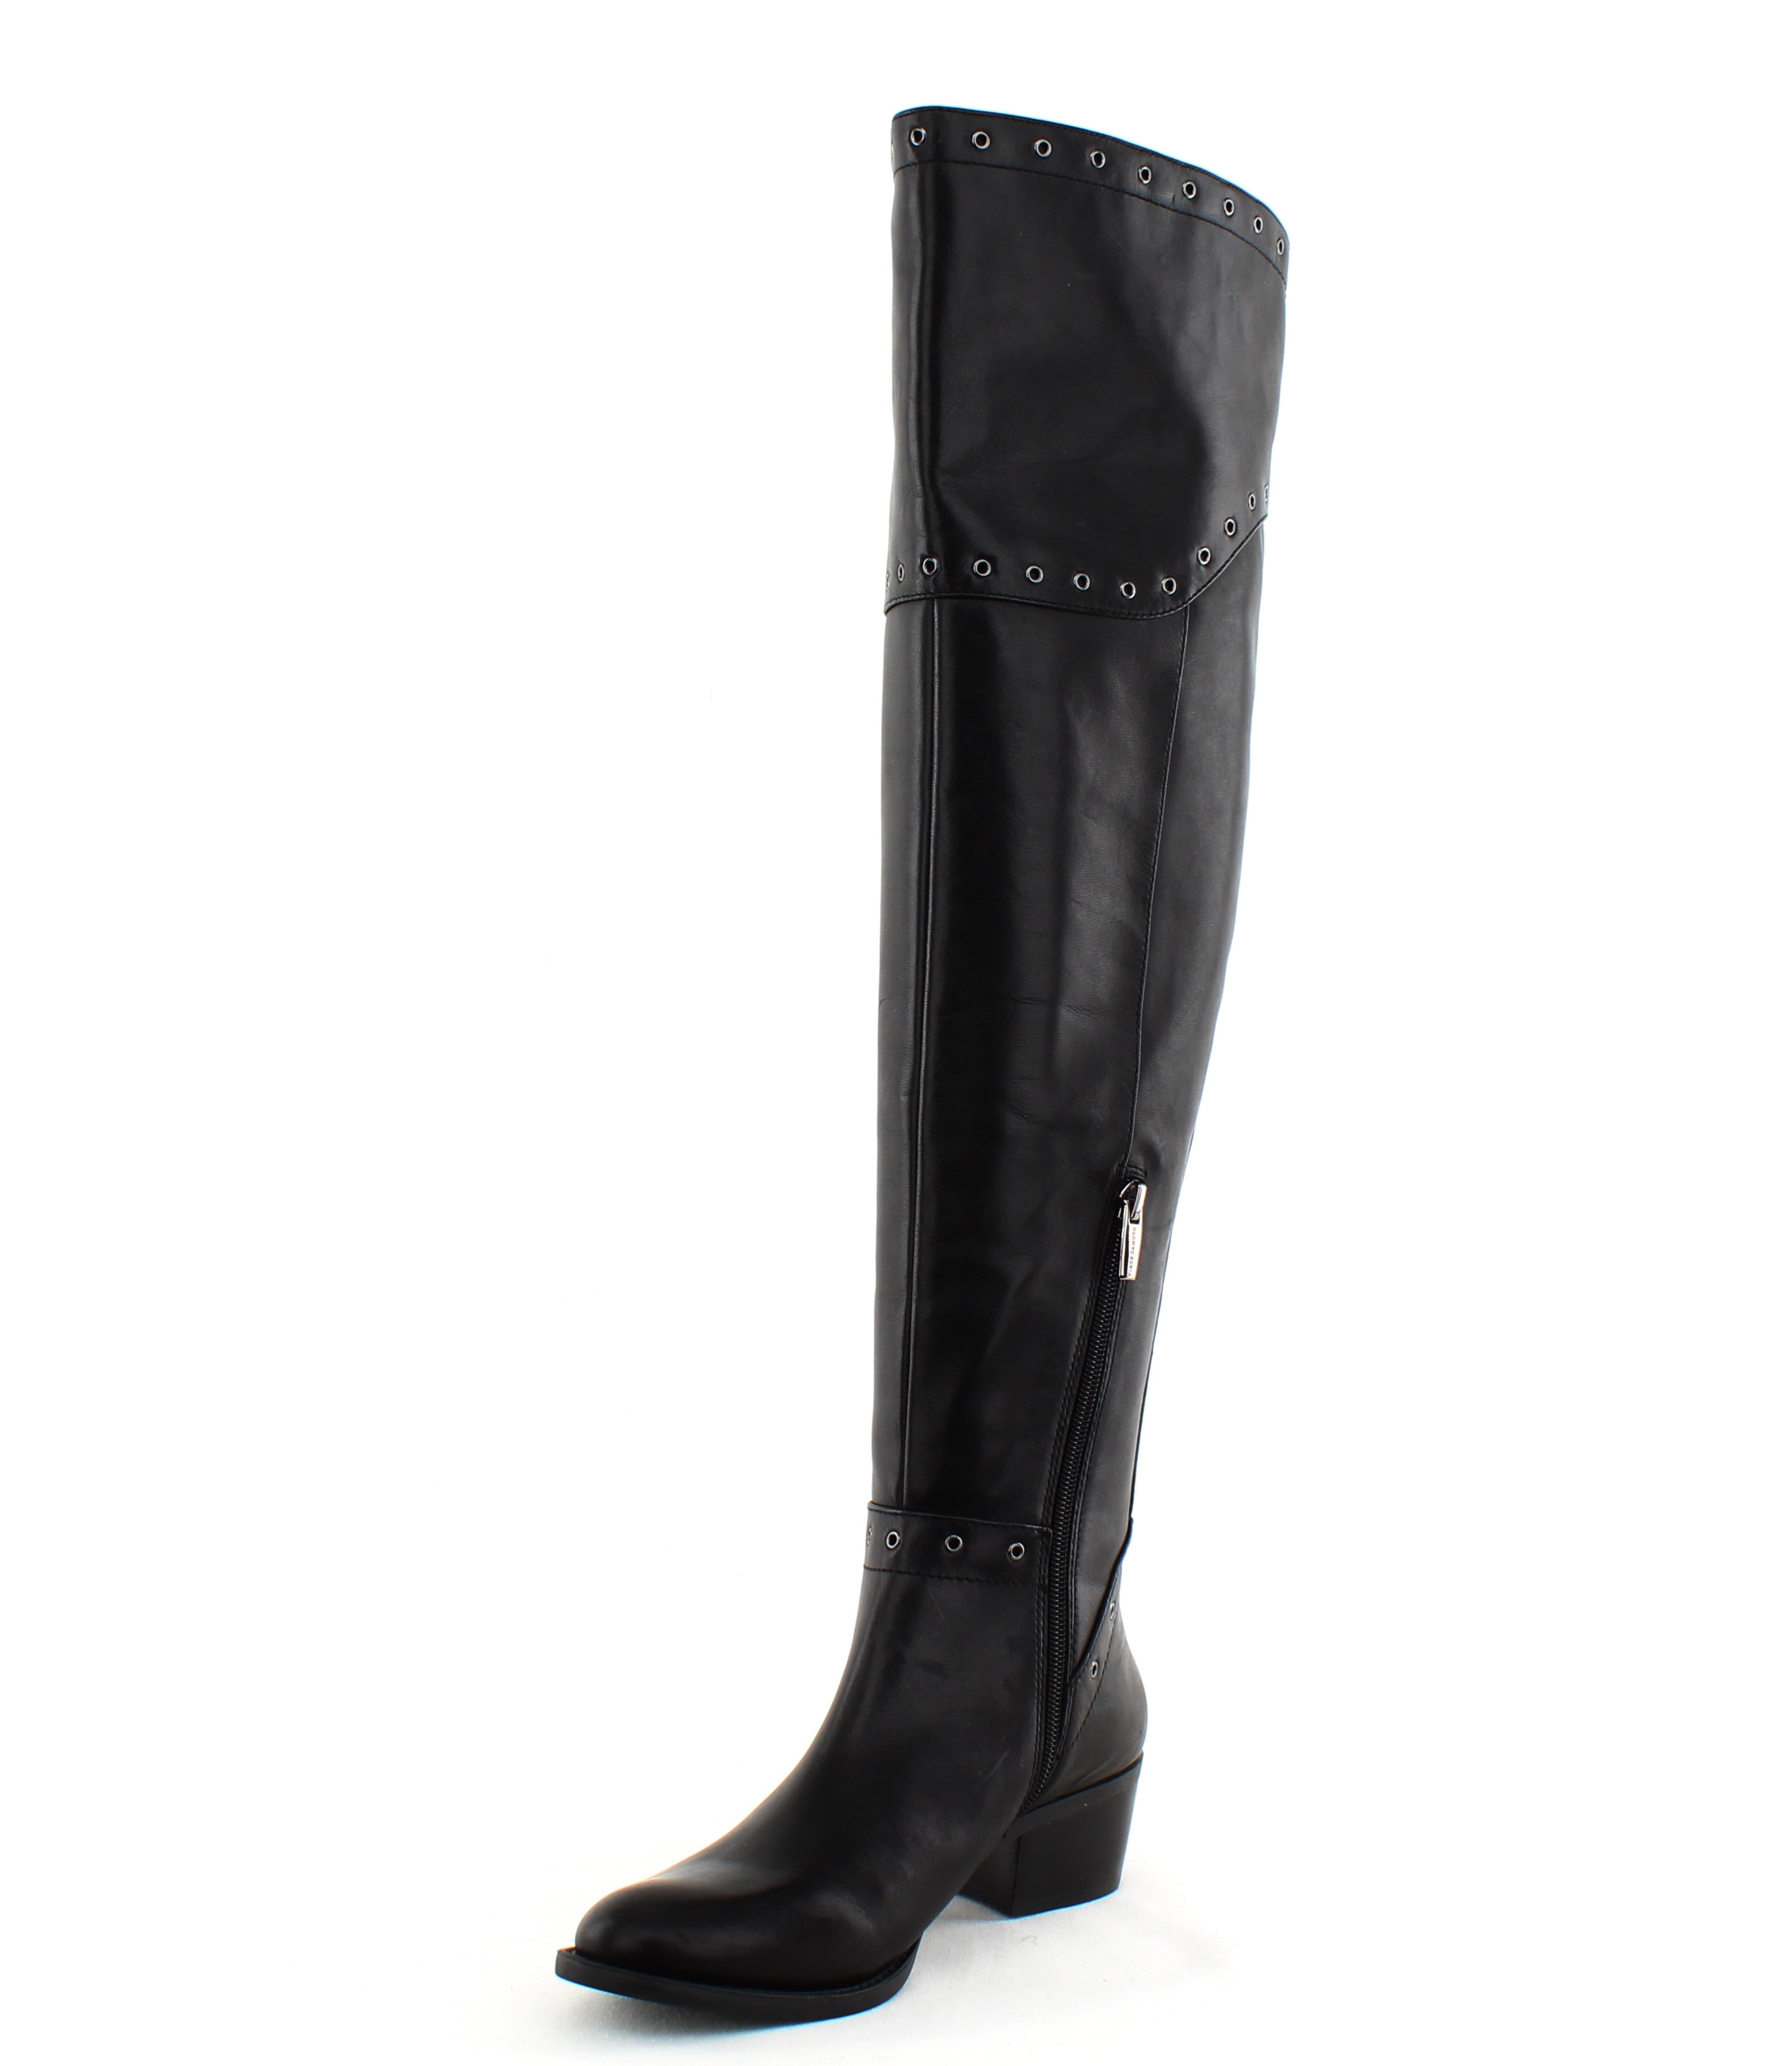 Vince Camuto Womens Bestan Wide Calf Fashion Over-The-Knee Boots Shoes BHFO 1508